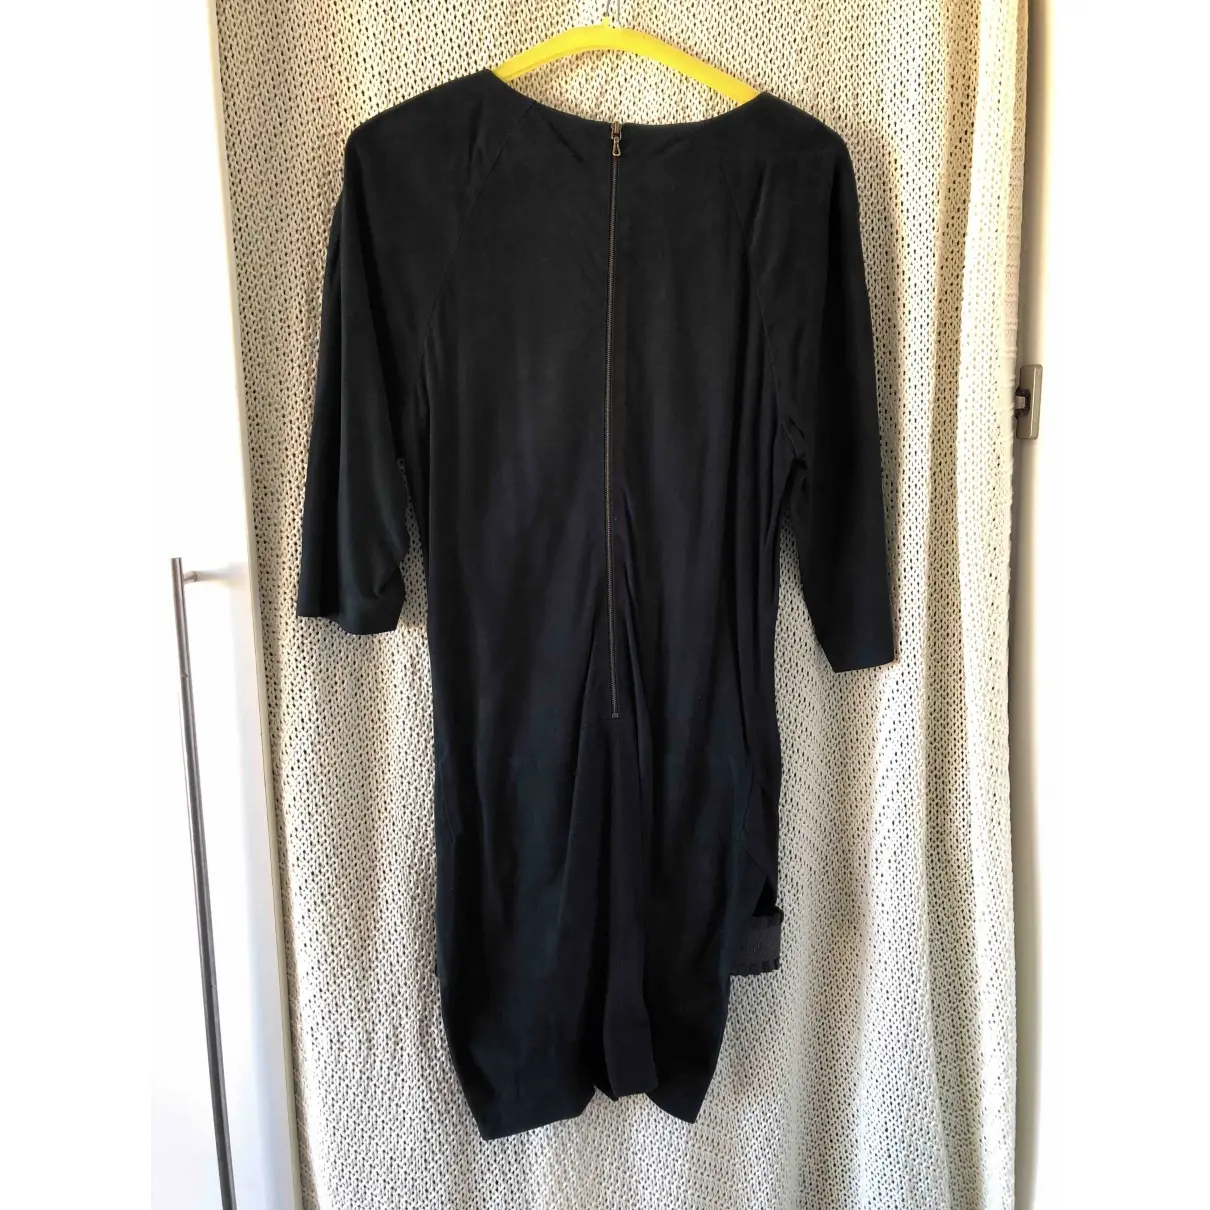 Anthony Vaccarello Mini dress for sale